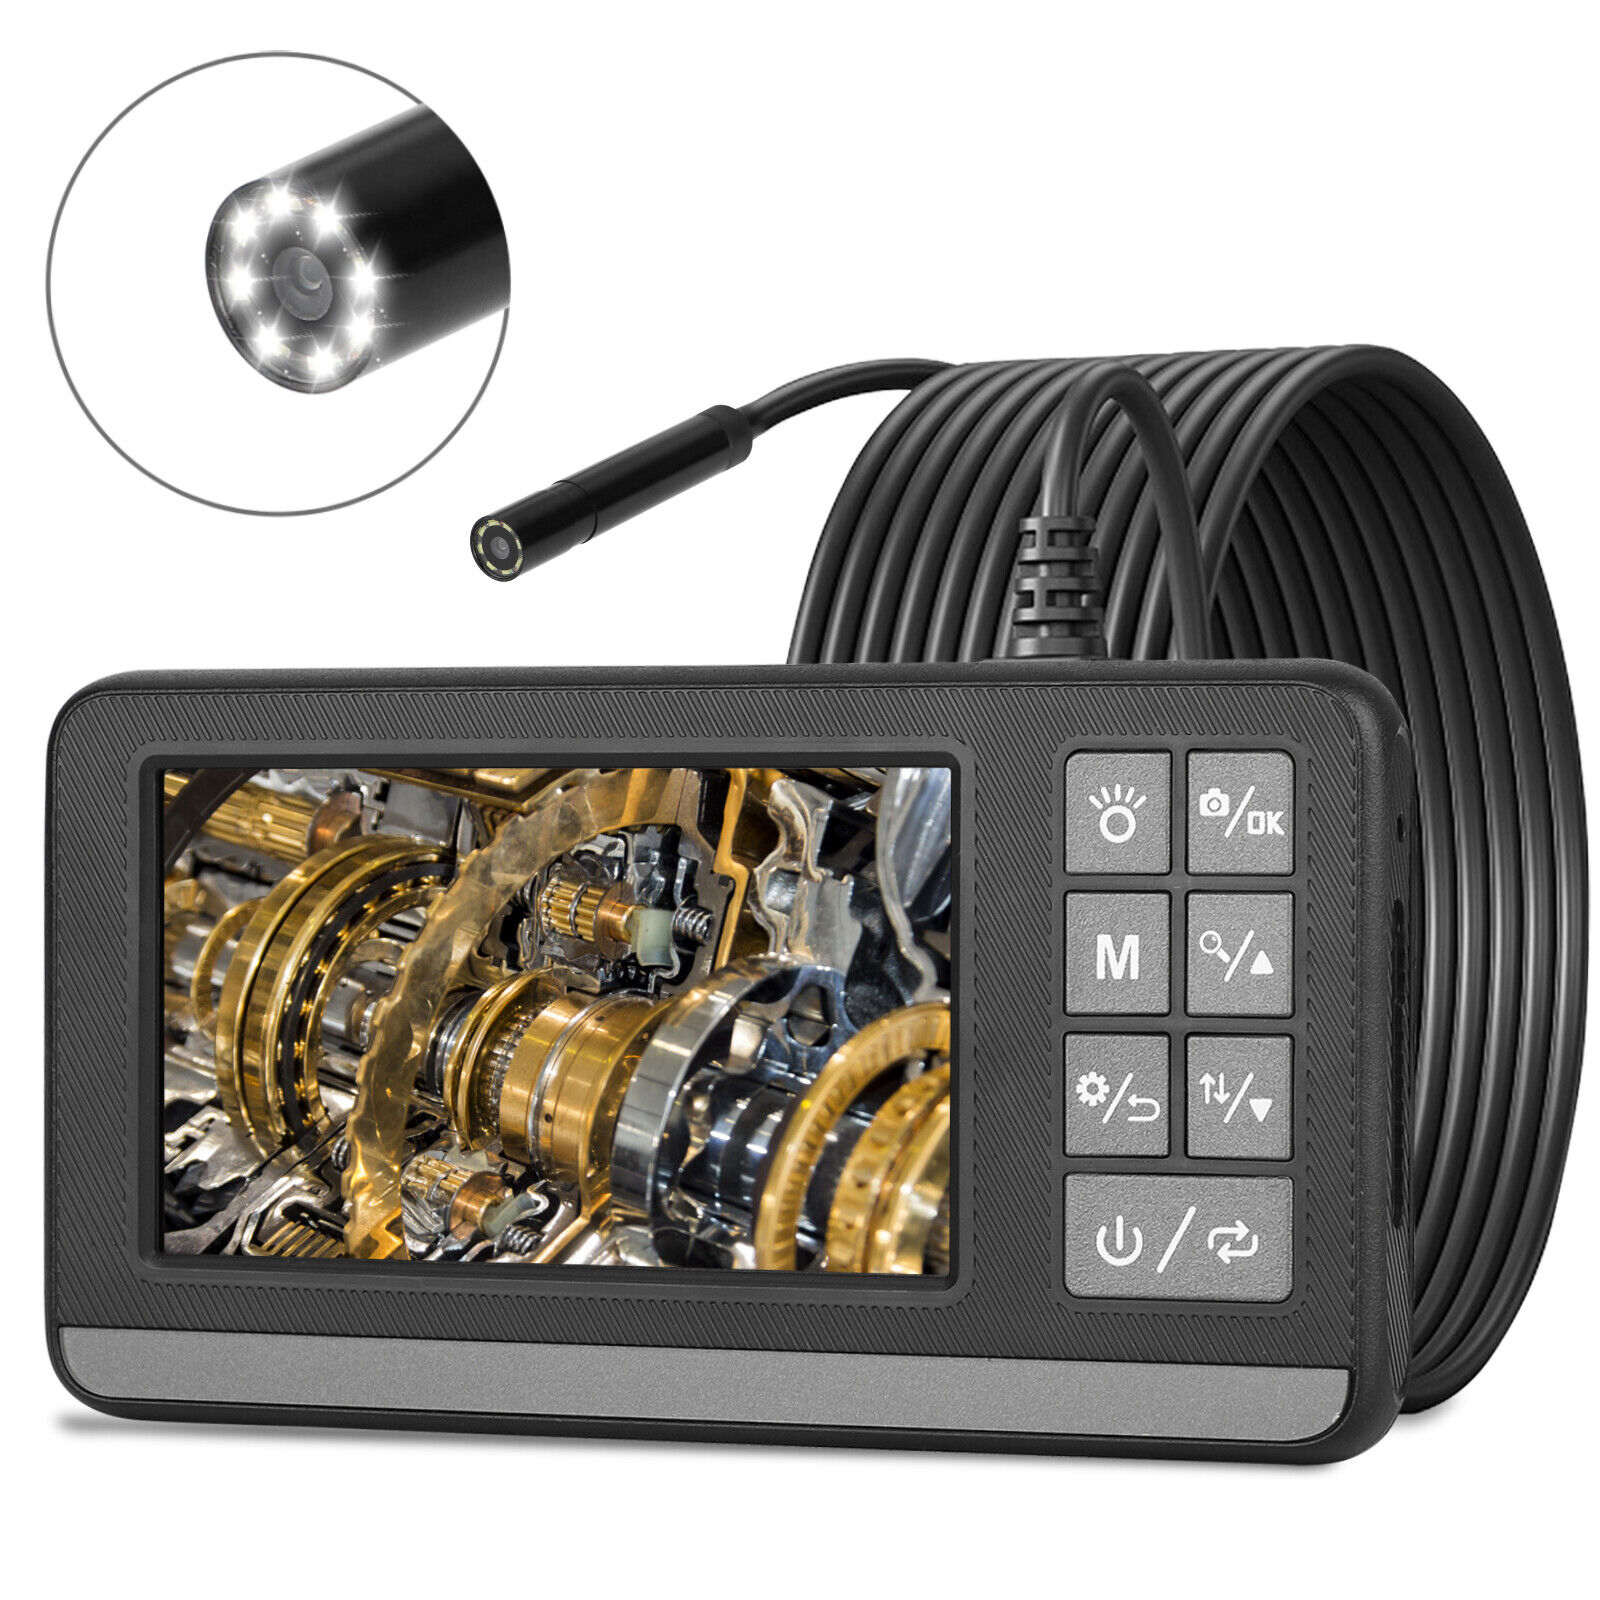 4.3 inch Lcd Screen Industrial Endoscope 8mm 1080p HD Borescope Inspection Camera with 8 LED Lights